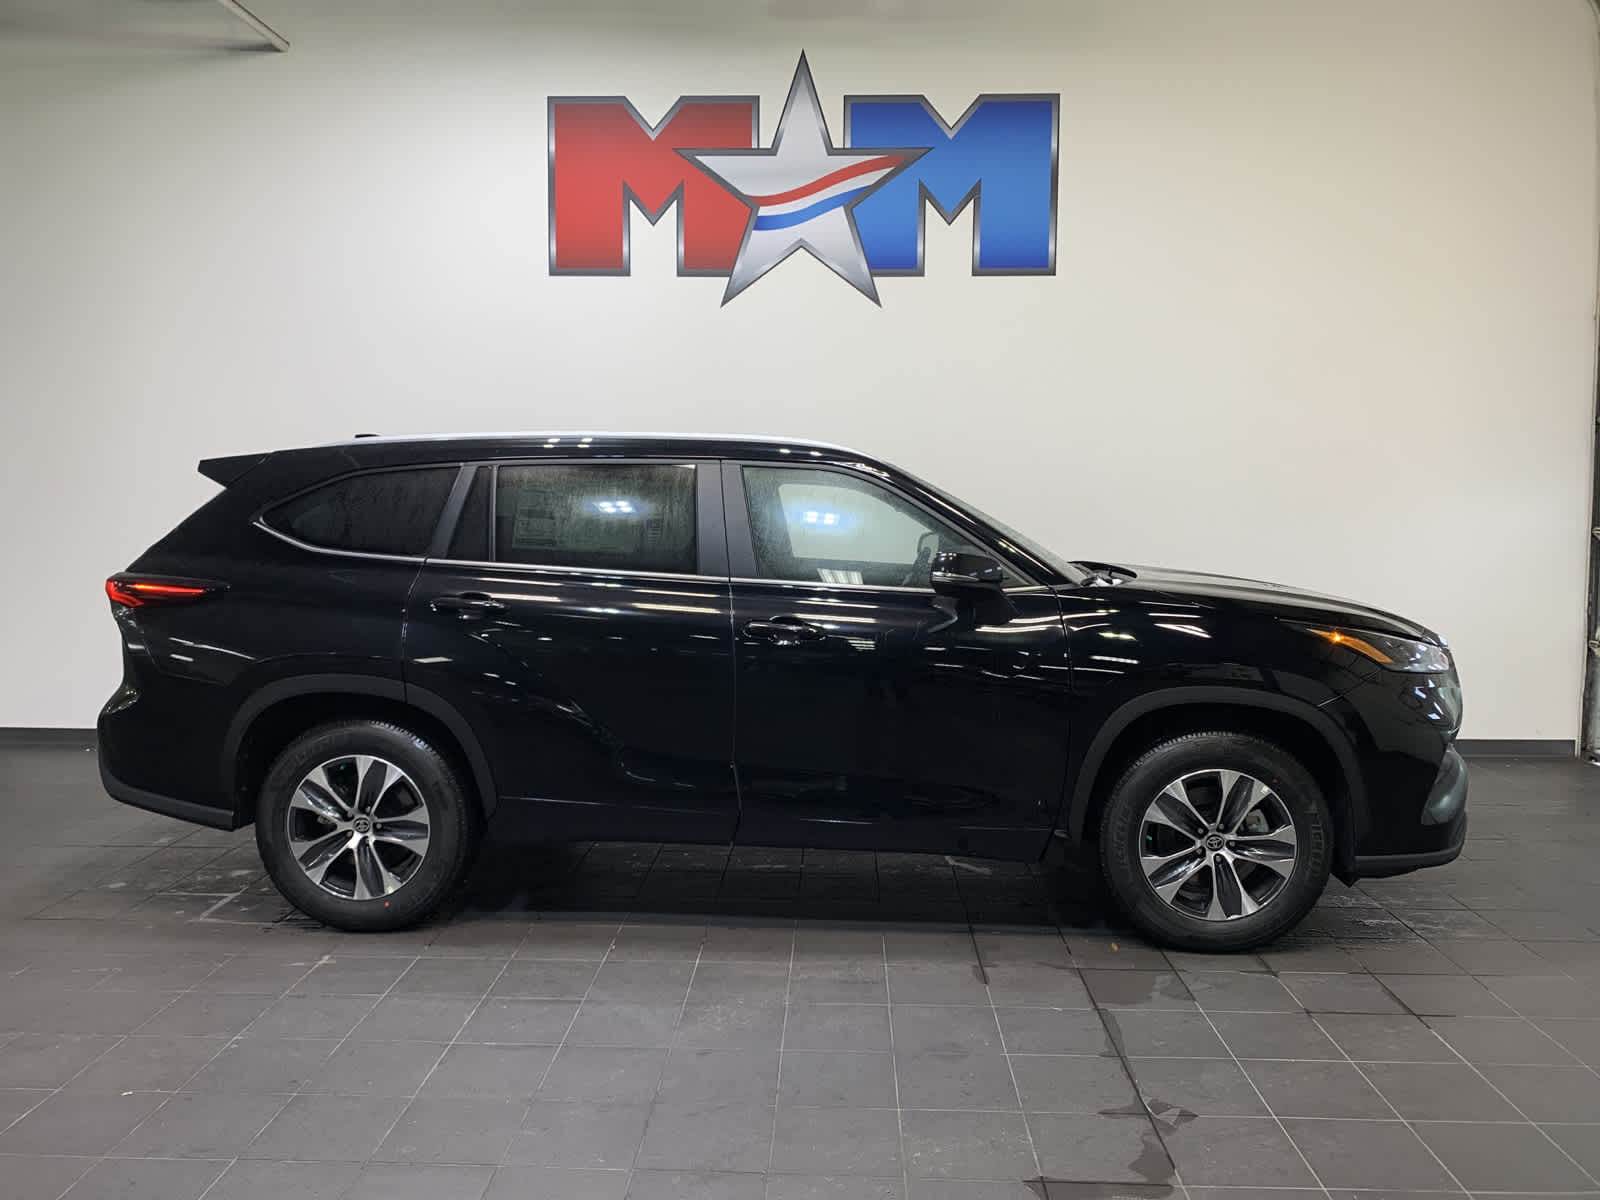 New Toyota Highlander for Sale Near Me (with Photos)